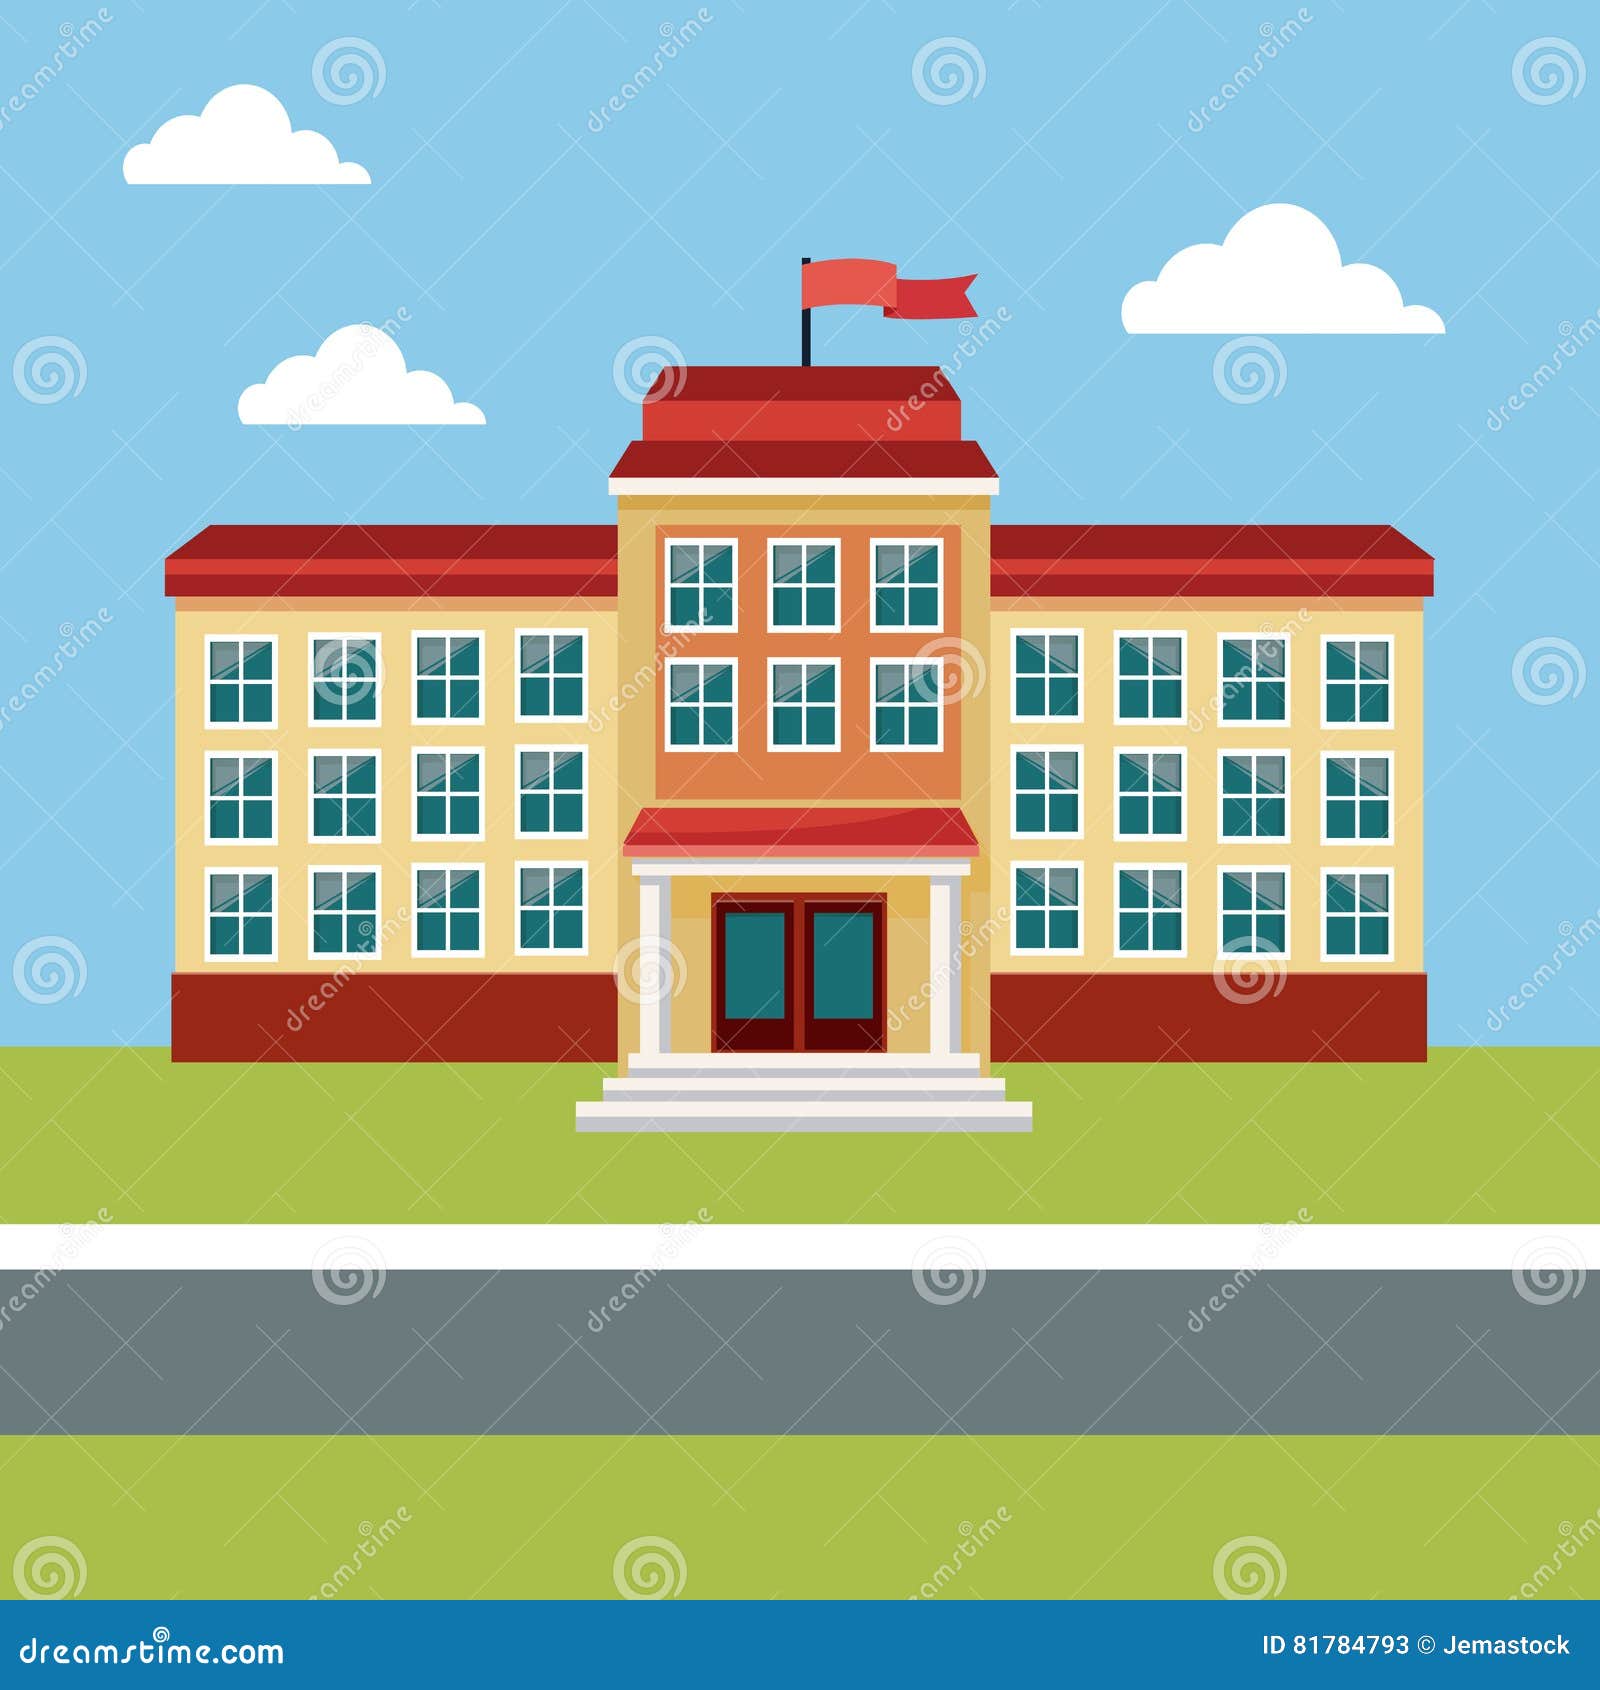 Building School Back Education Place Stock Vector - Illustration of ...